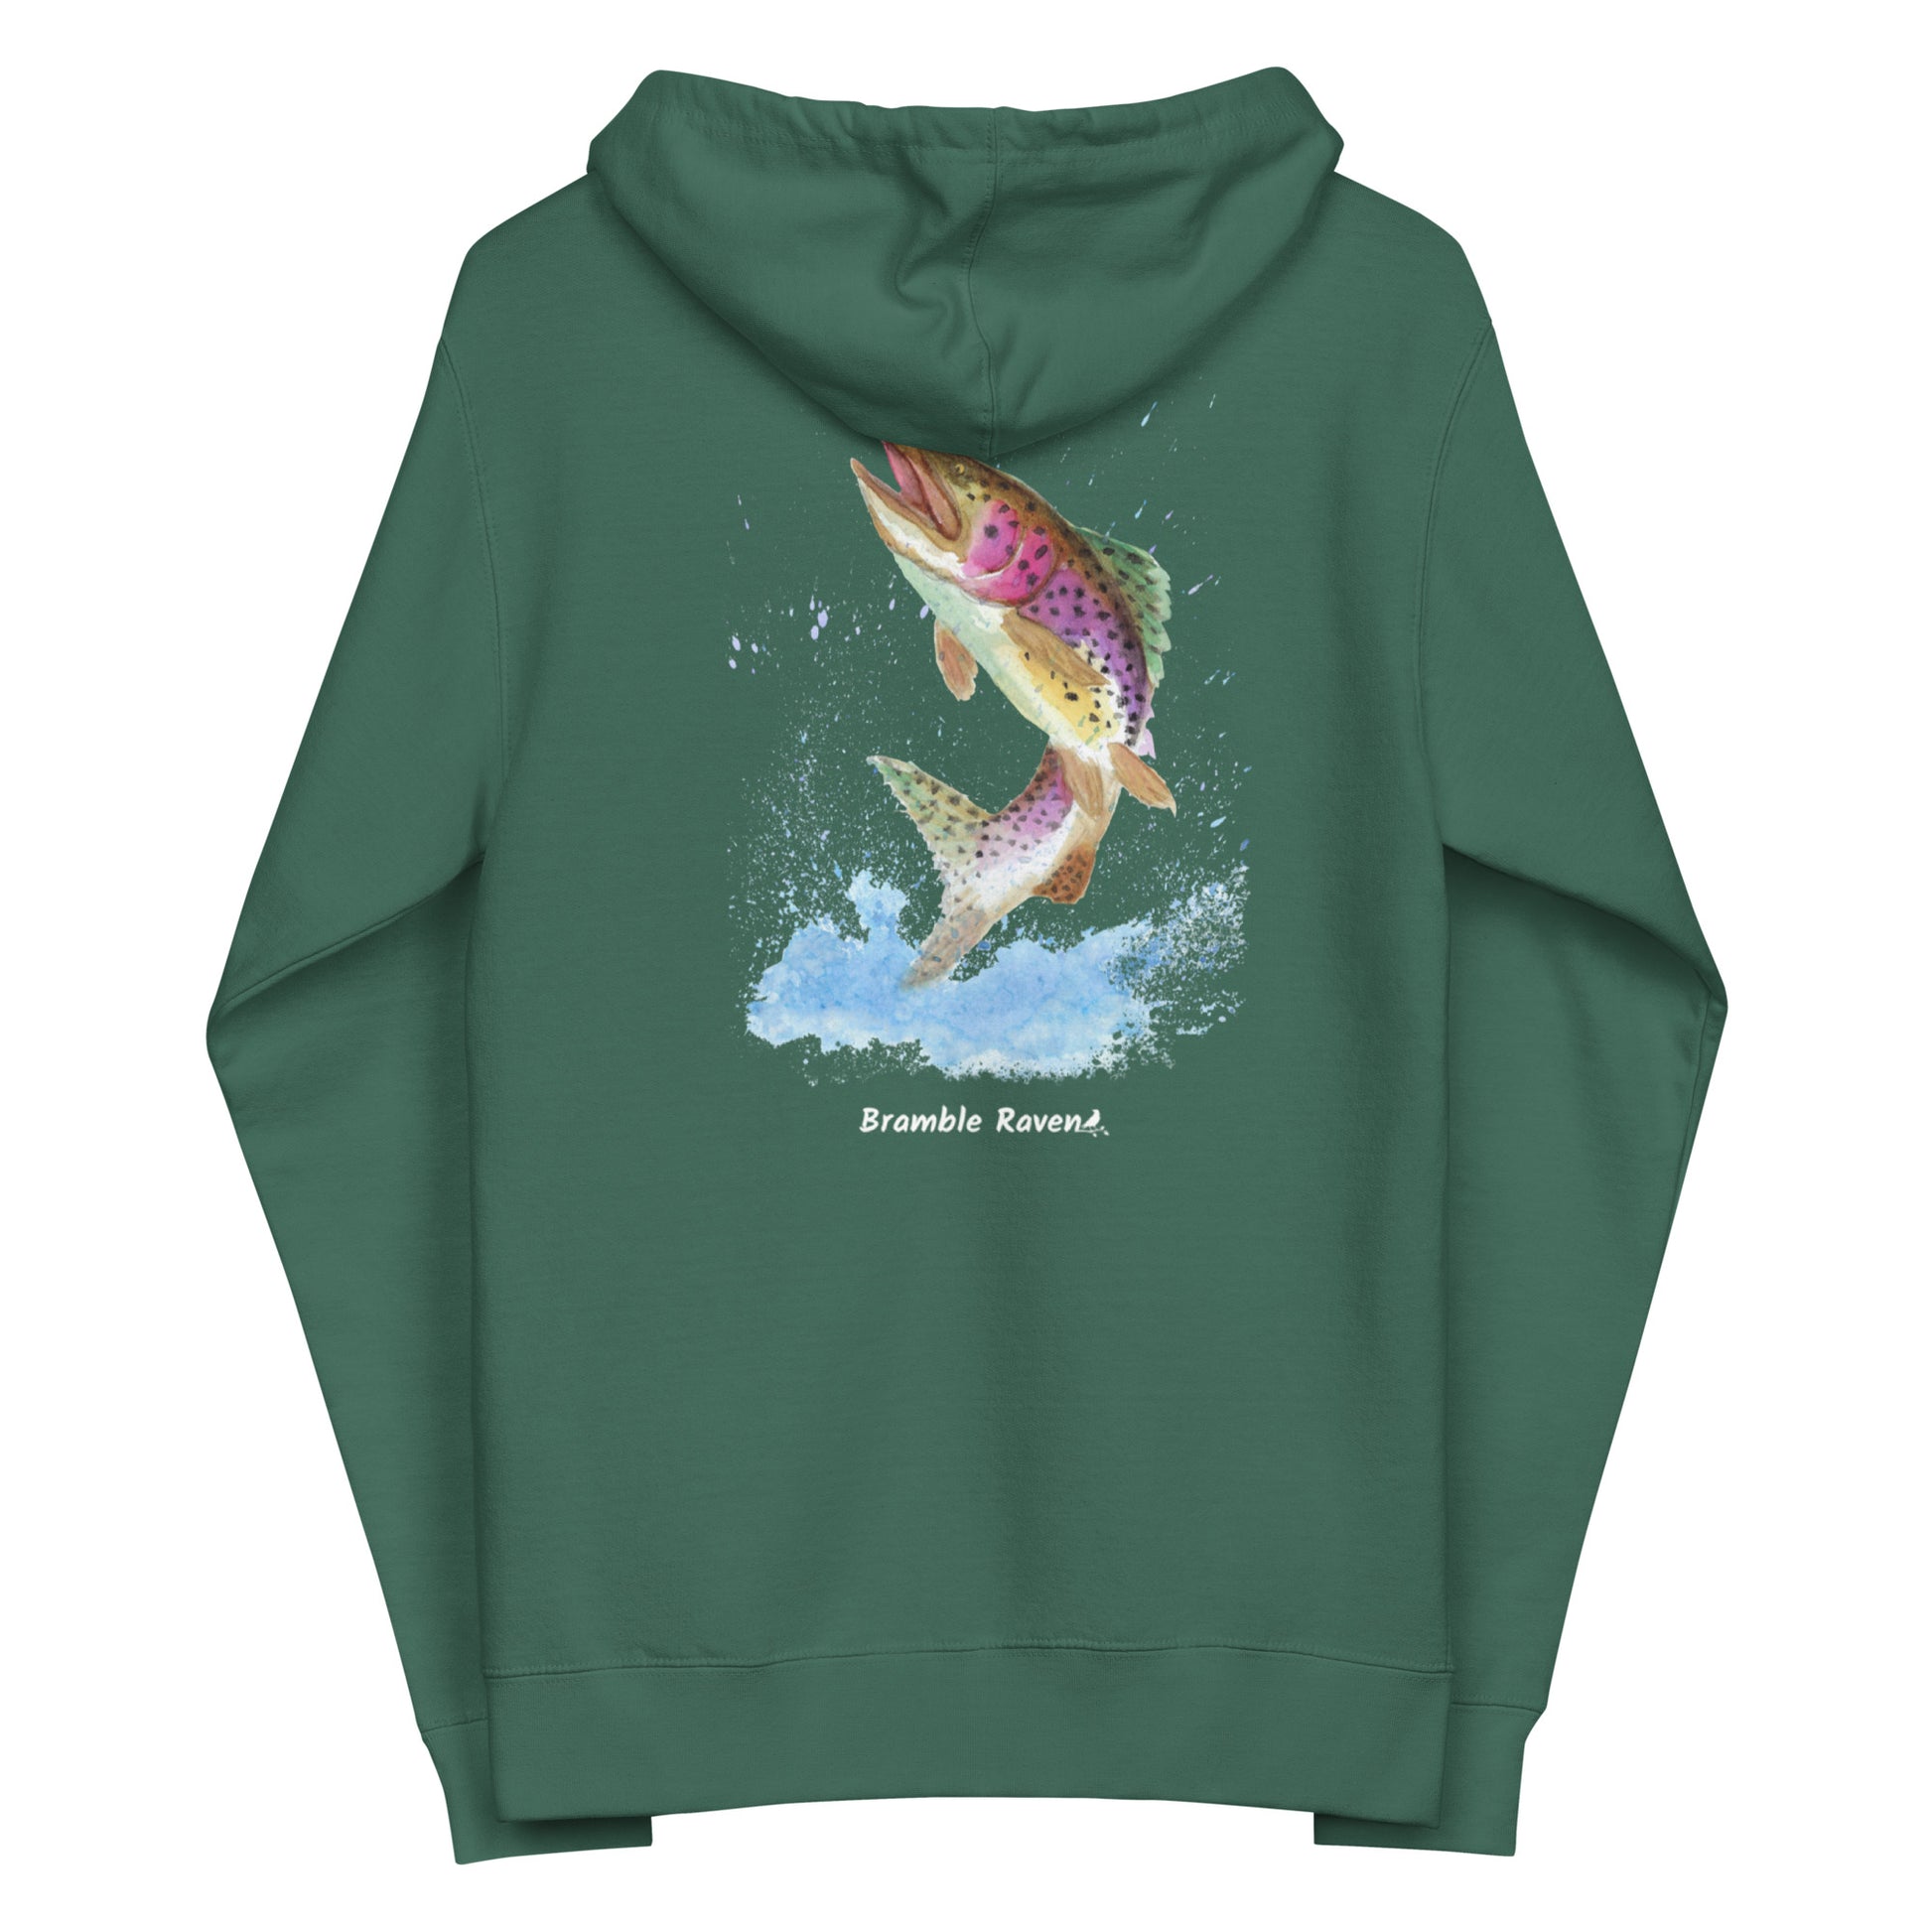 Unisex alpine green colored fleece-lined zip-up hoodie. Features original watercolor painting of a rainbow trout leaping from the water on the back of the hoodie.